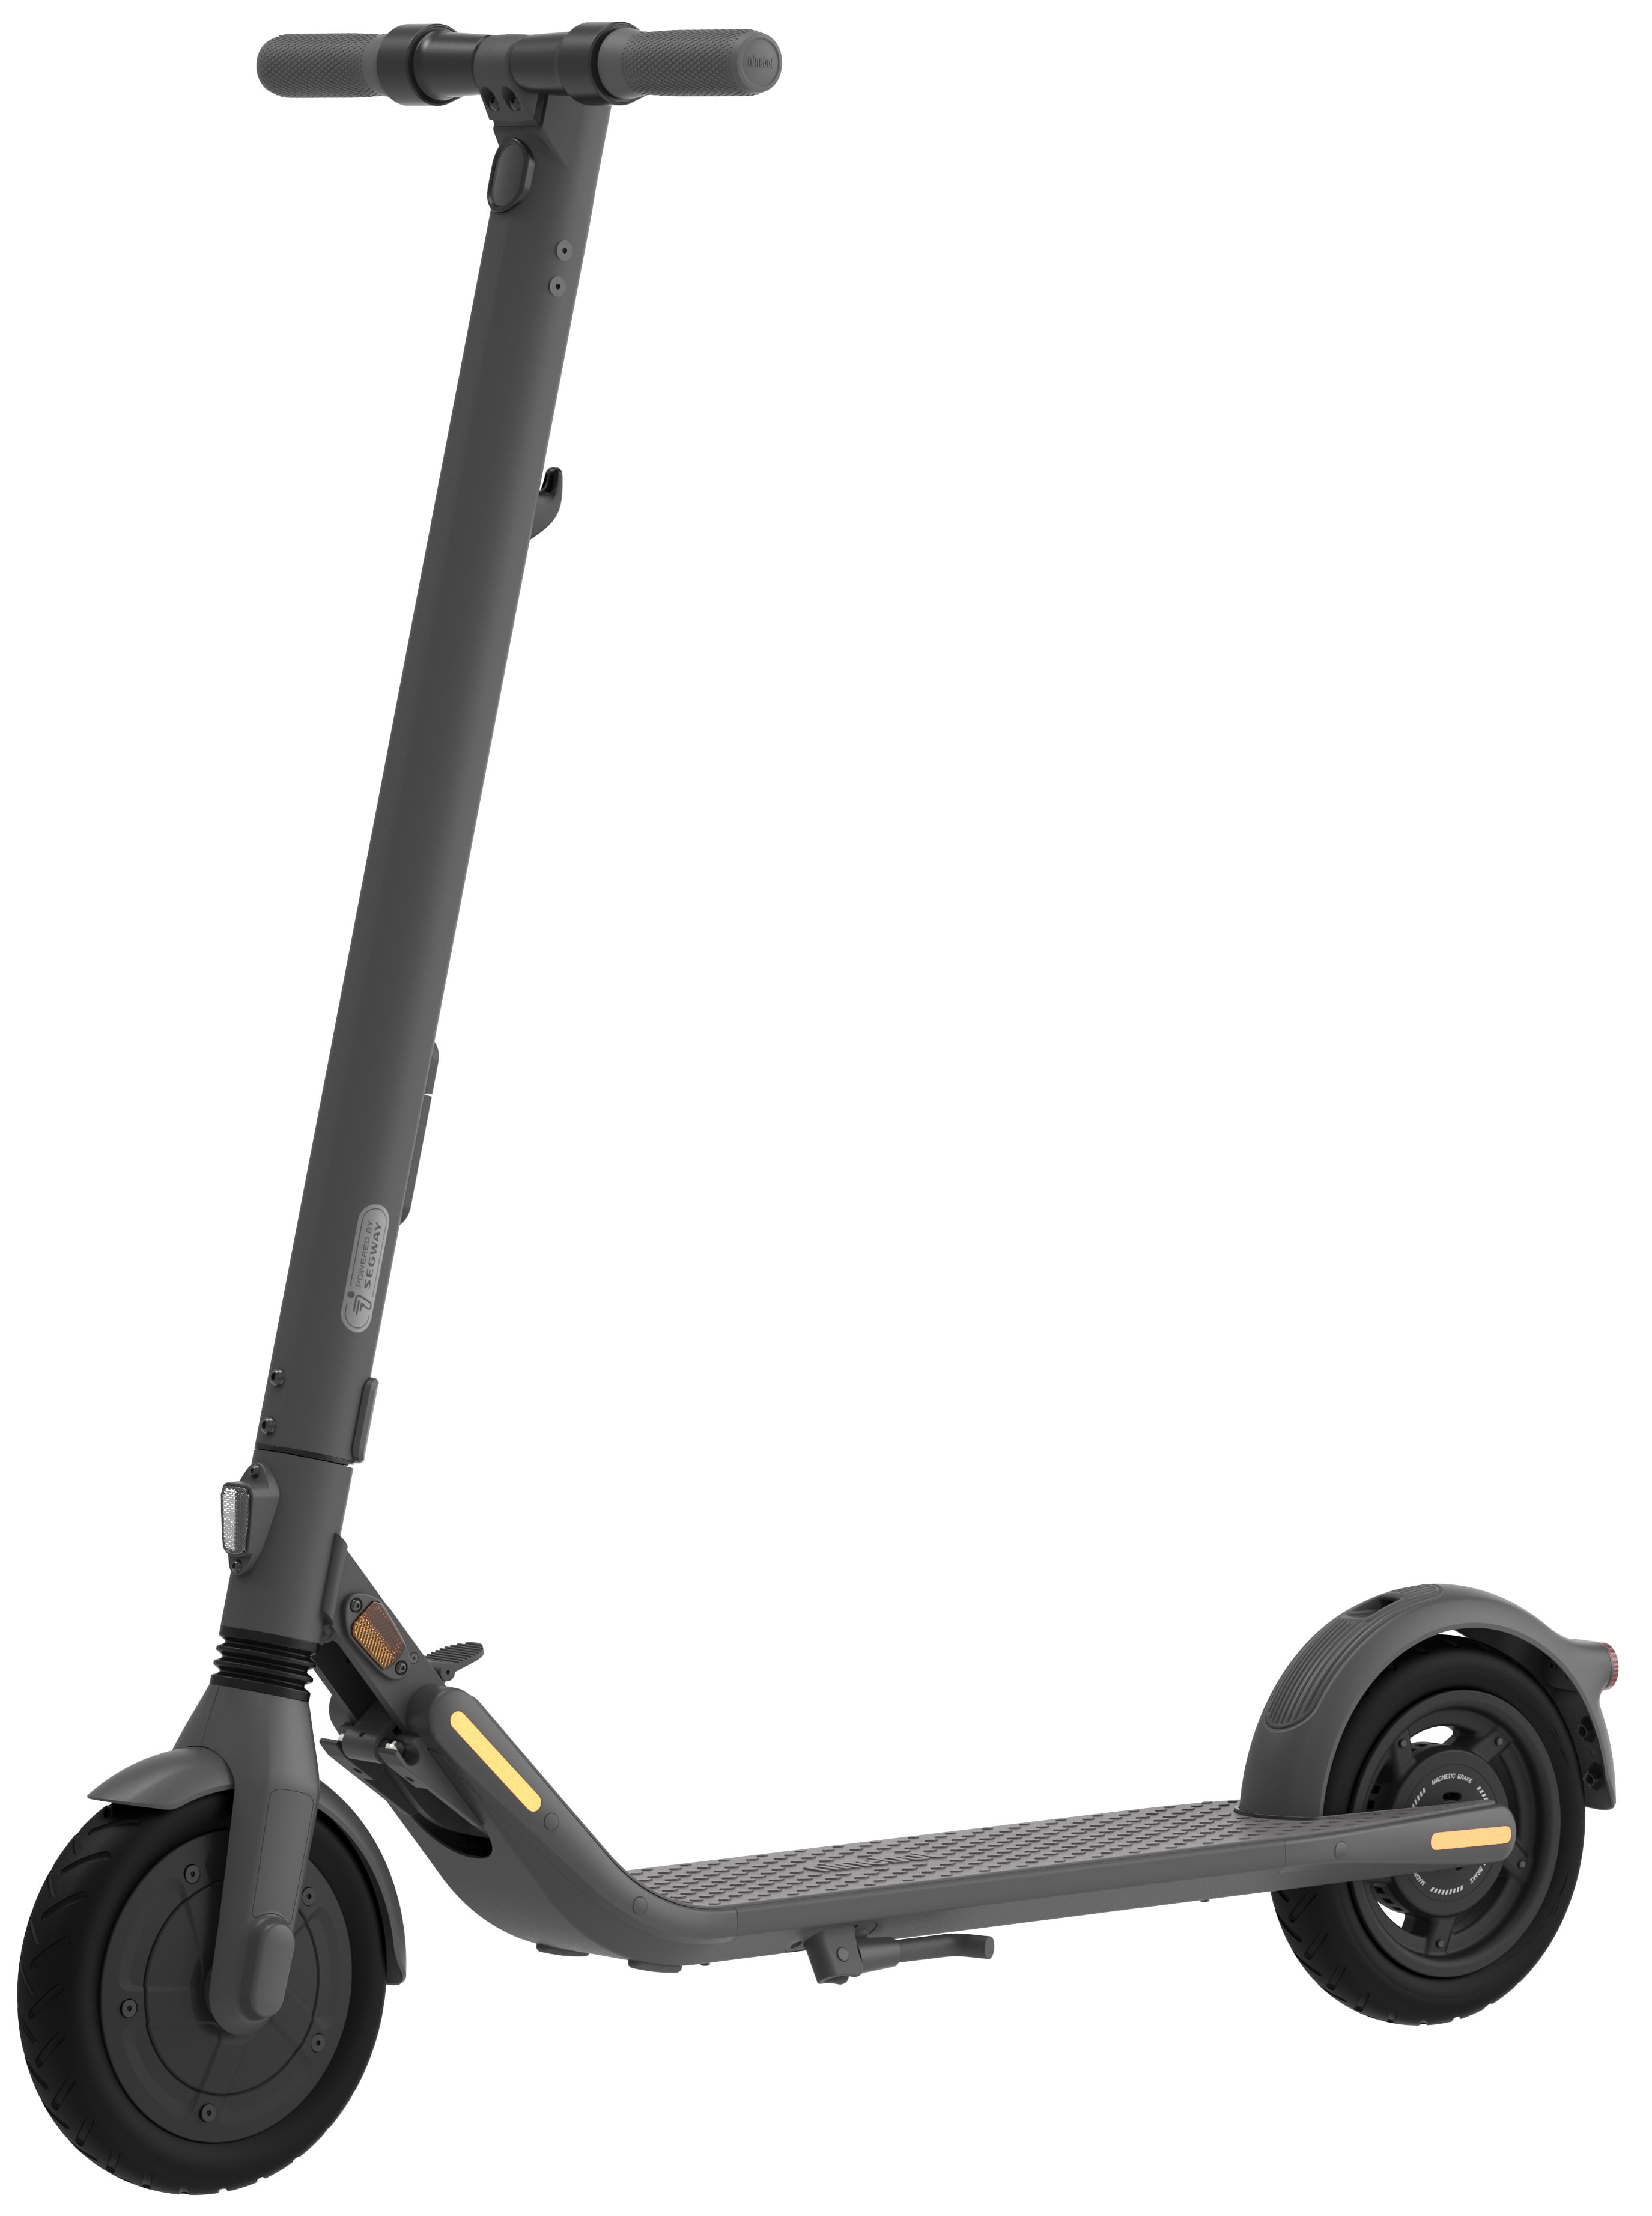 Segway Ninebot E25a Kick Scooter Electric, Motor Power, 9-inch Dual Density Tires, Lightweight and Foldable - Walmart.com